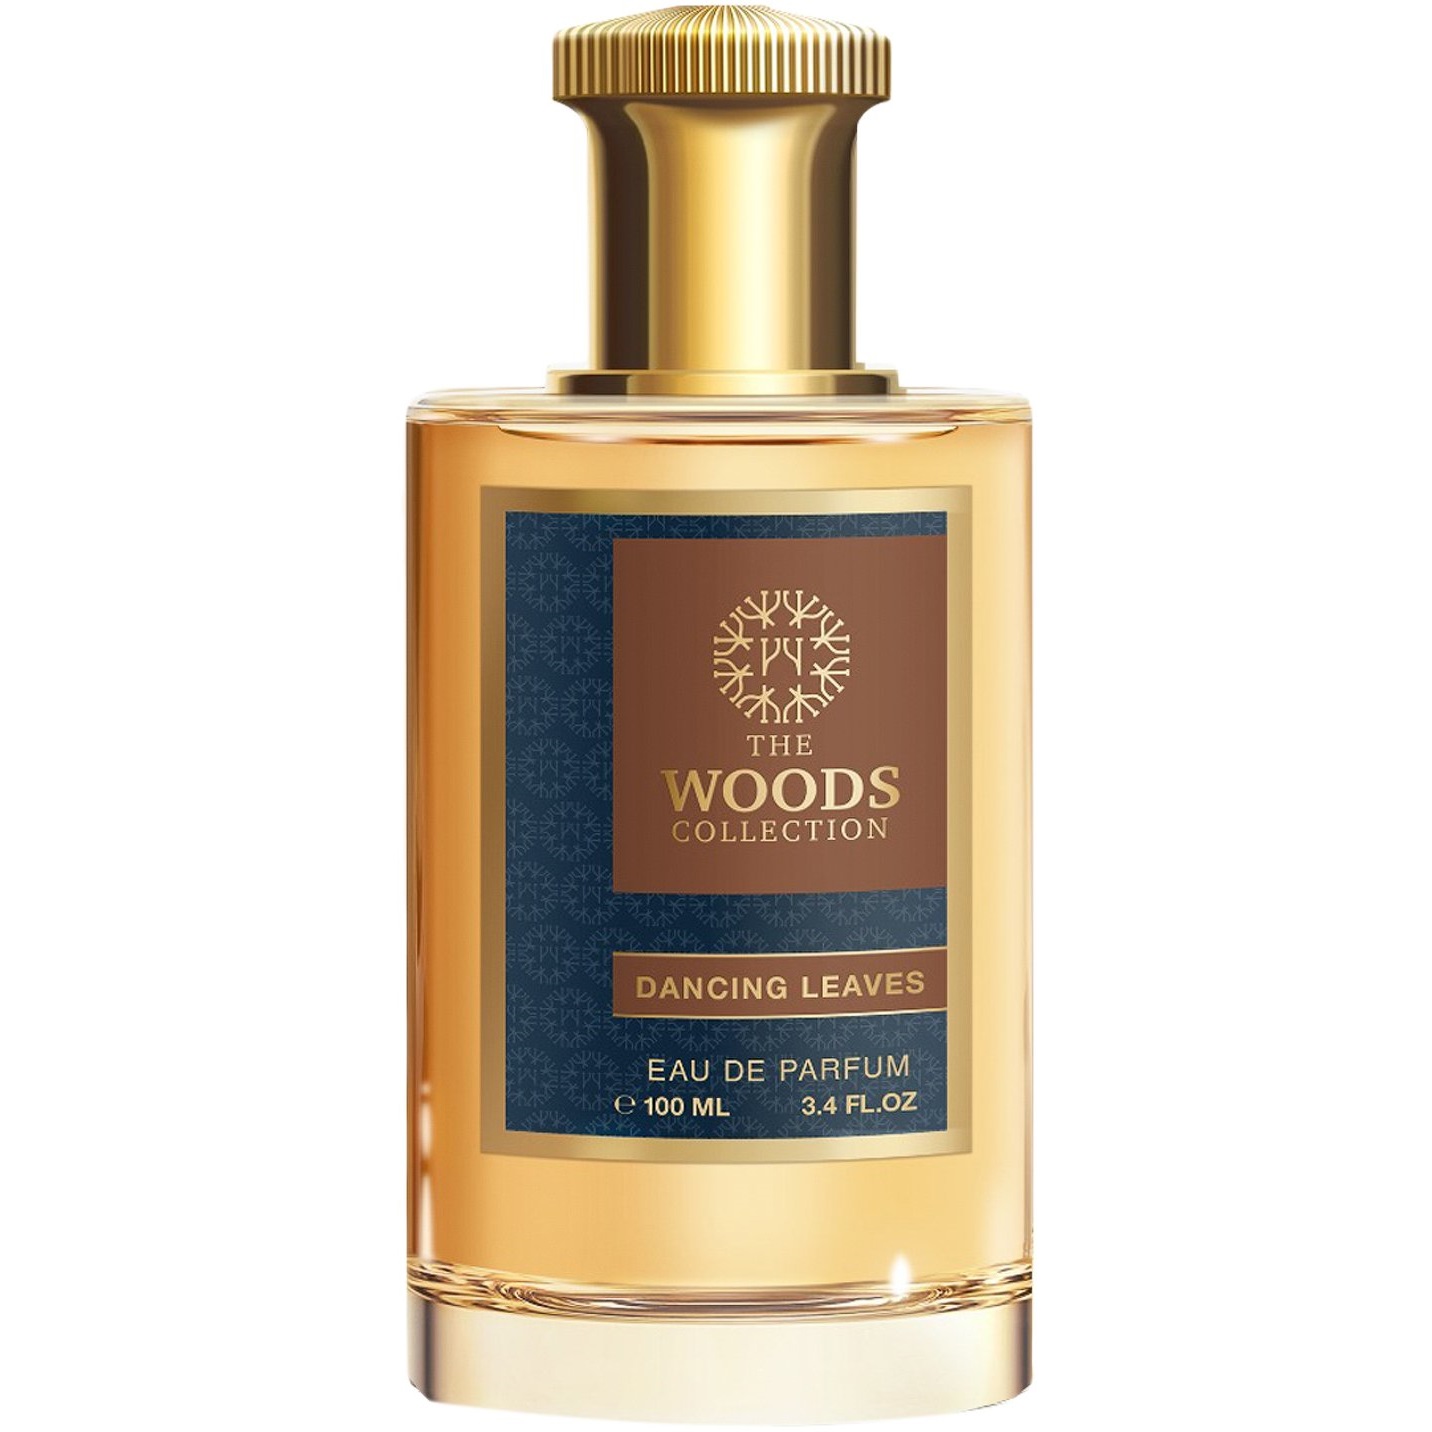 Shine collection. The Woods collection Azure EDP 100ml Tester. The Woods collection унисекс Twilight the Woods collection парфюмированная вода (EDP) 100мл. The Woods collection унисекс Pure Shine парфюмированная вода (EDP) 100мл. Woods collection духи Wild Roses.